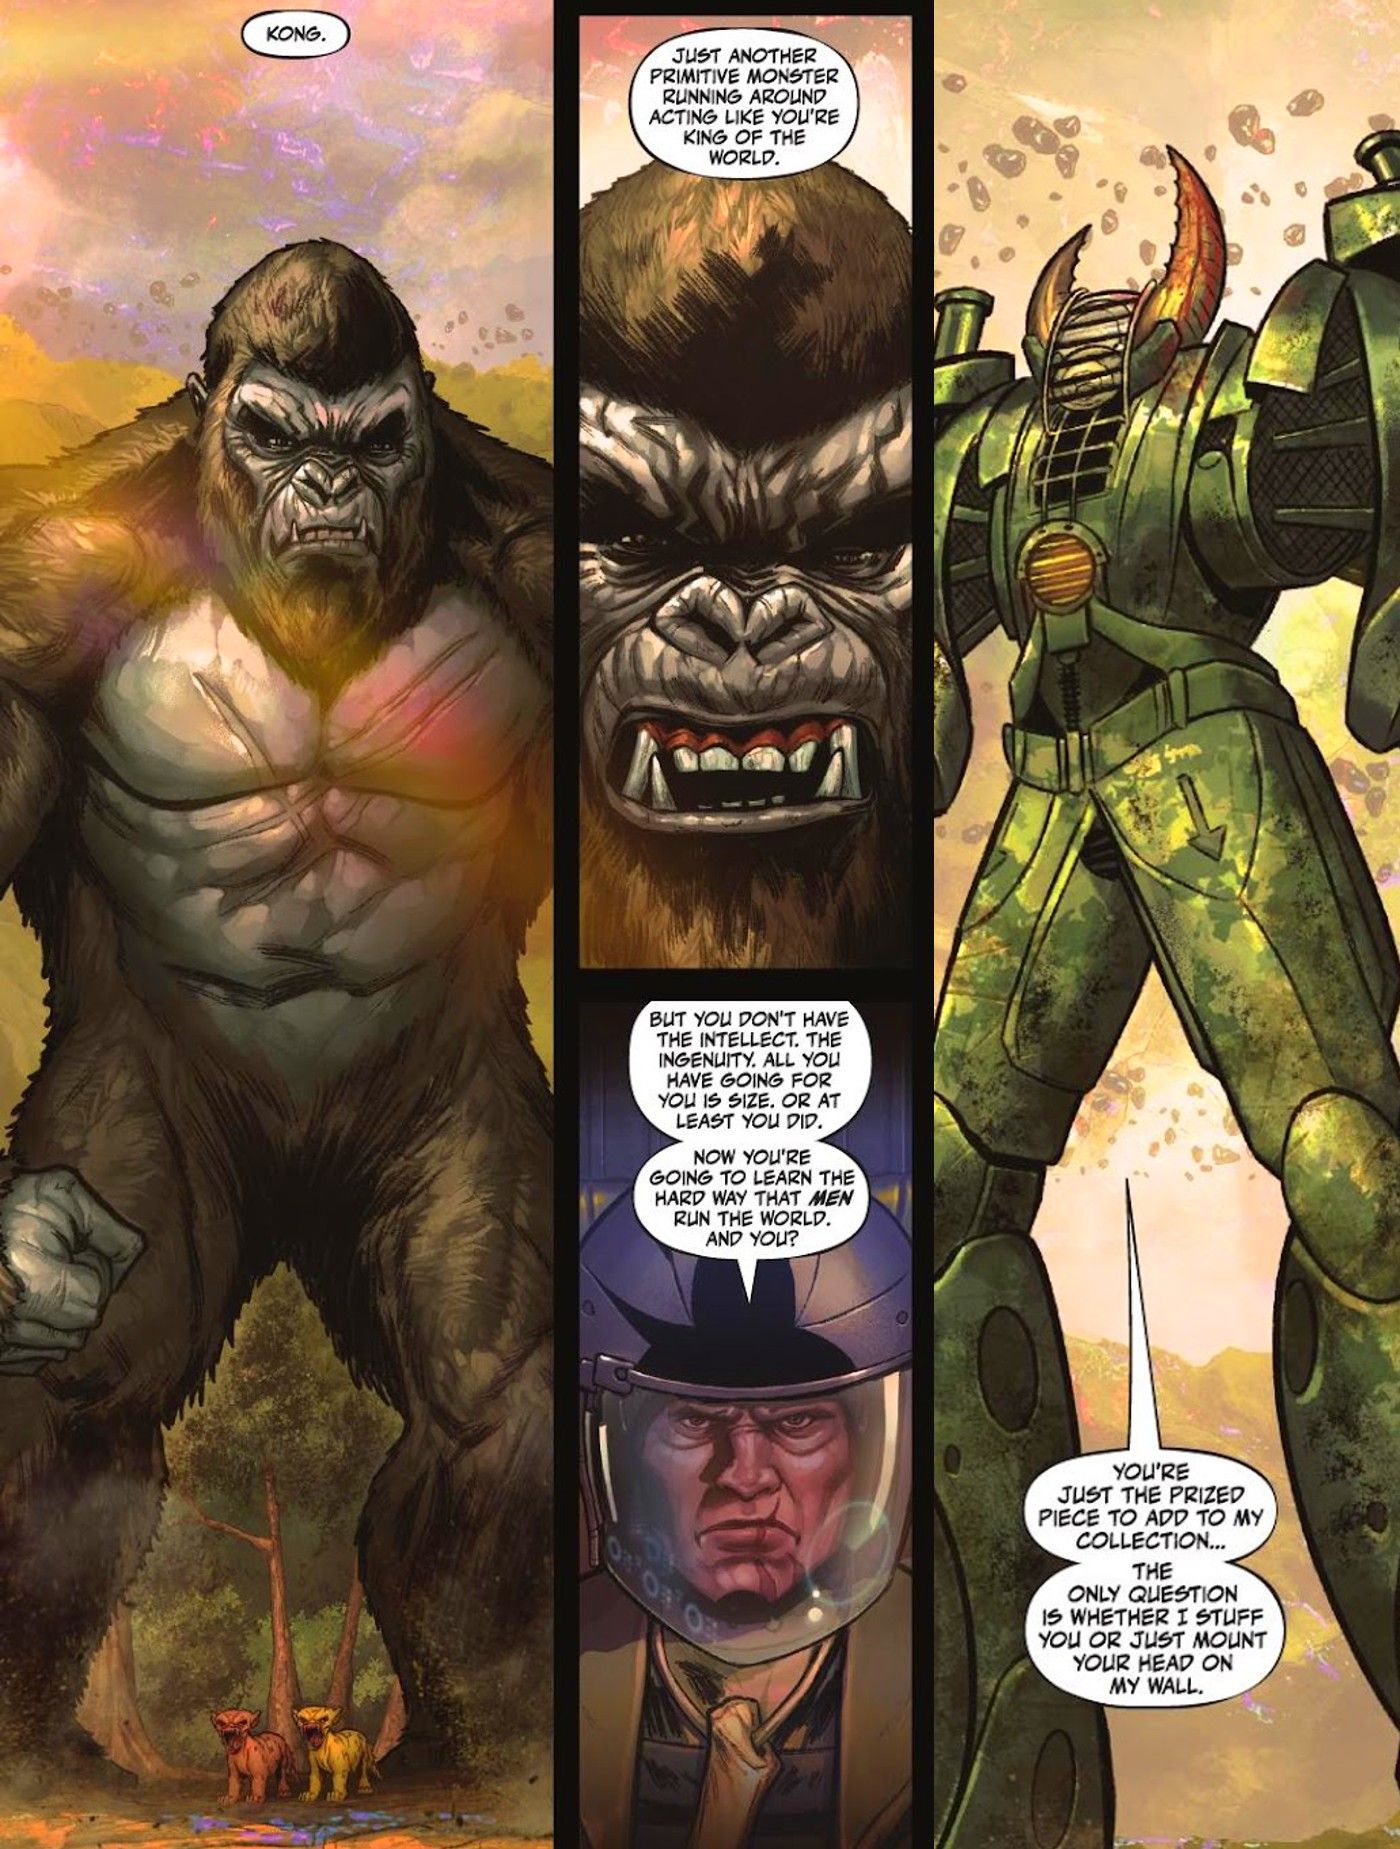 Kong Finally Gets His Own Mechagodzilla-Style Opposite in Official MonsterVerse Continuity